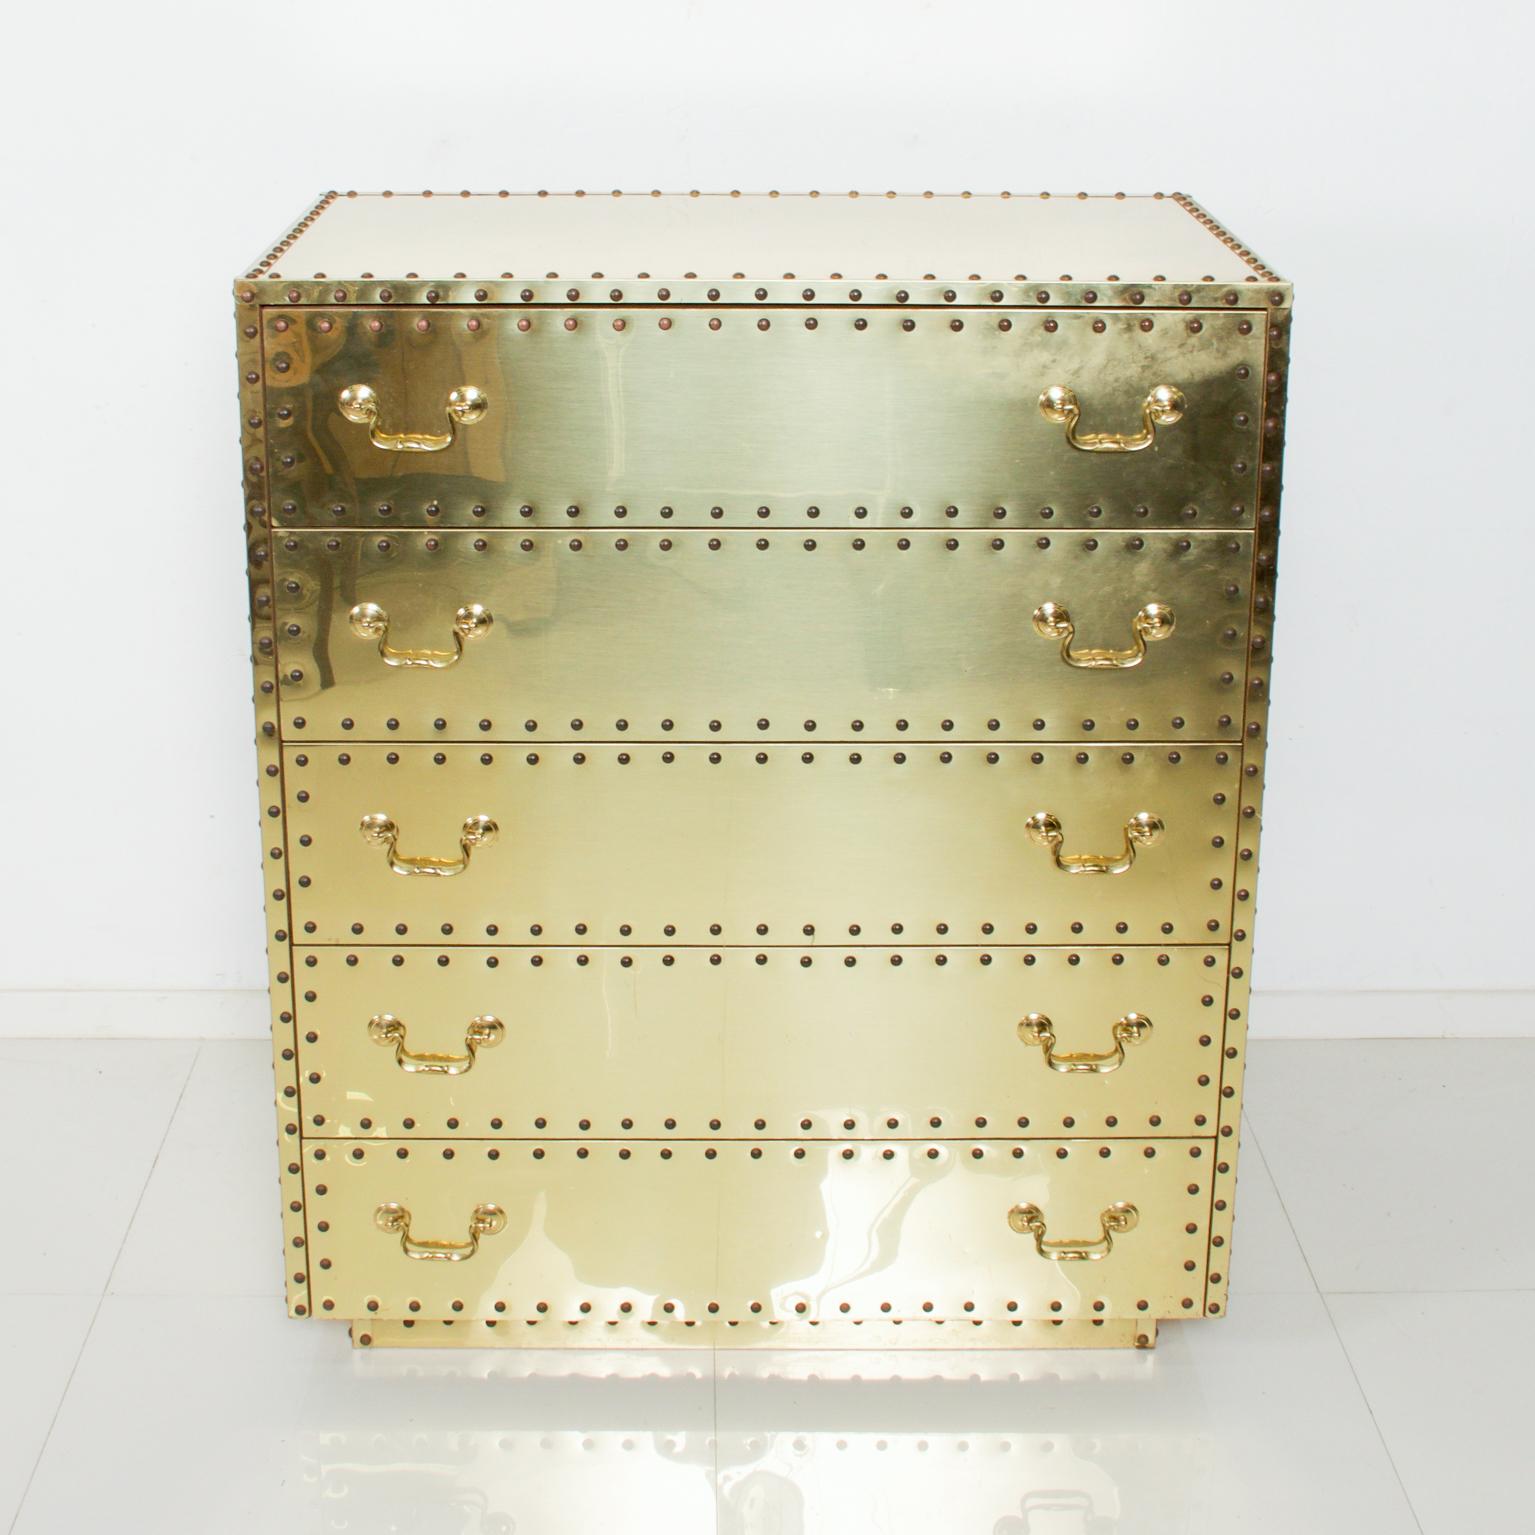 Dresser Chest
1970s Hollywood Regency Disco Highboy Chest by Spanish Design House SARRREID Ltd of Spain 
5 Drawer Mirrored Campaign Brass with Nail Head Trim
Dimensions: 40.5 H x 20.25 D x 34.25 W
Original Unrestored Condition: stains, scratches,